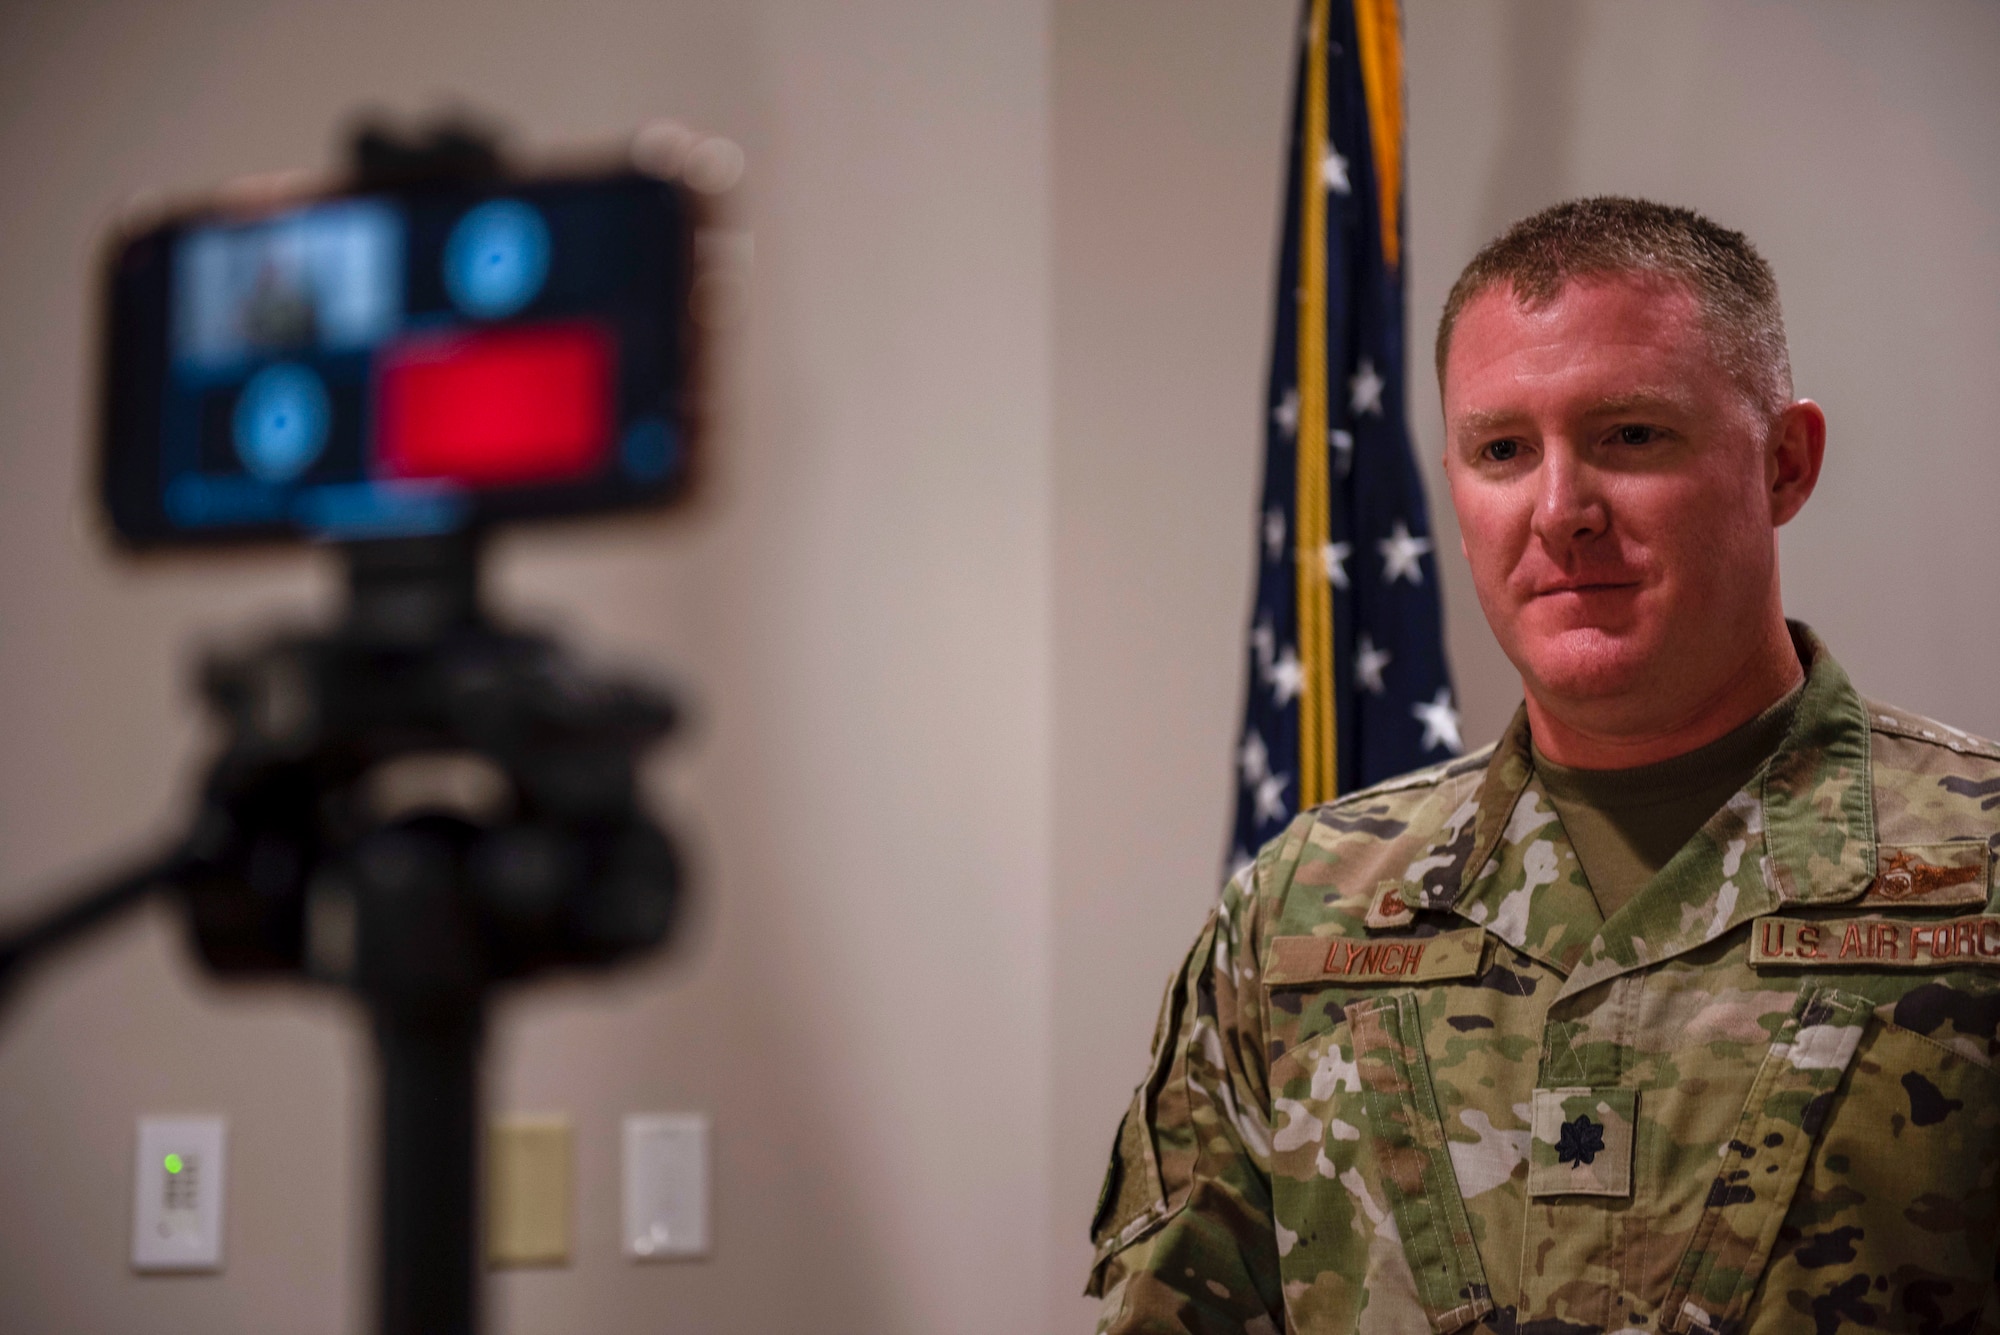 U.S. Air Force Lt. Col. Michael Lynch, 337th Air Control Squadron, commander, during a virtual ceremony held at the 337th ACS Air Battle Manager schoolhouse at Tyndall Air Force Base, Florida, May 26, 2020. The ceremony was held to honor the naming and dedication of Building 1285. (U.S. Air Force photo by Staff Sgt. Magen M. Reeves)